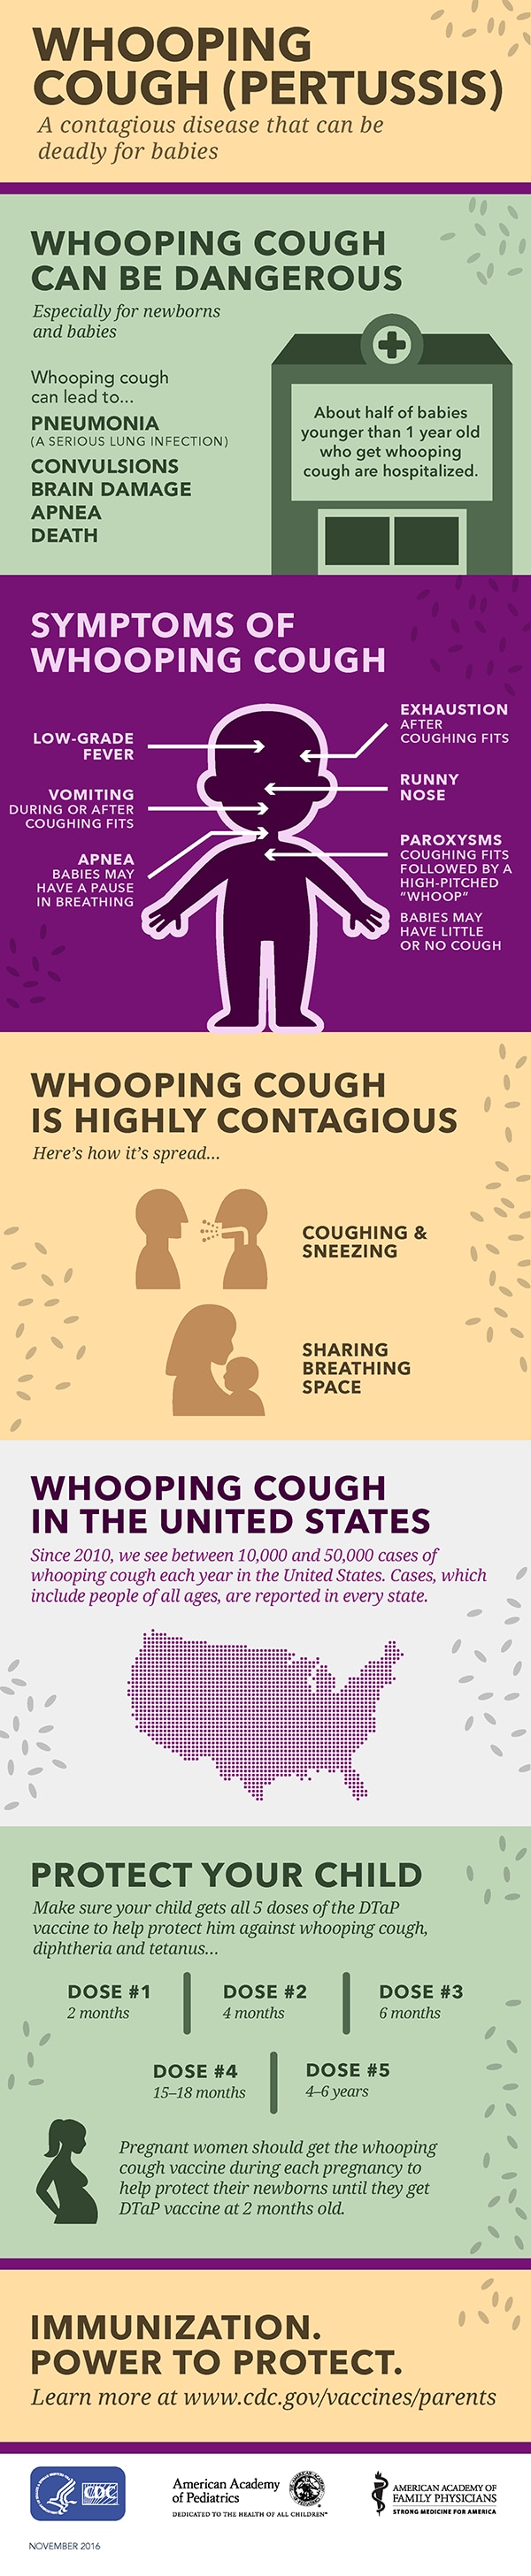 Whooping Cough VaccinePreventable Diseases Infographic  CDC